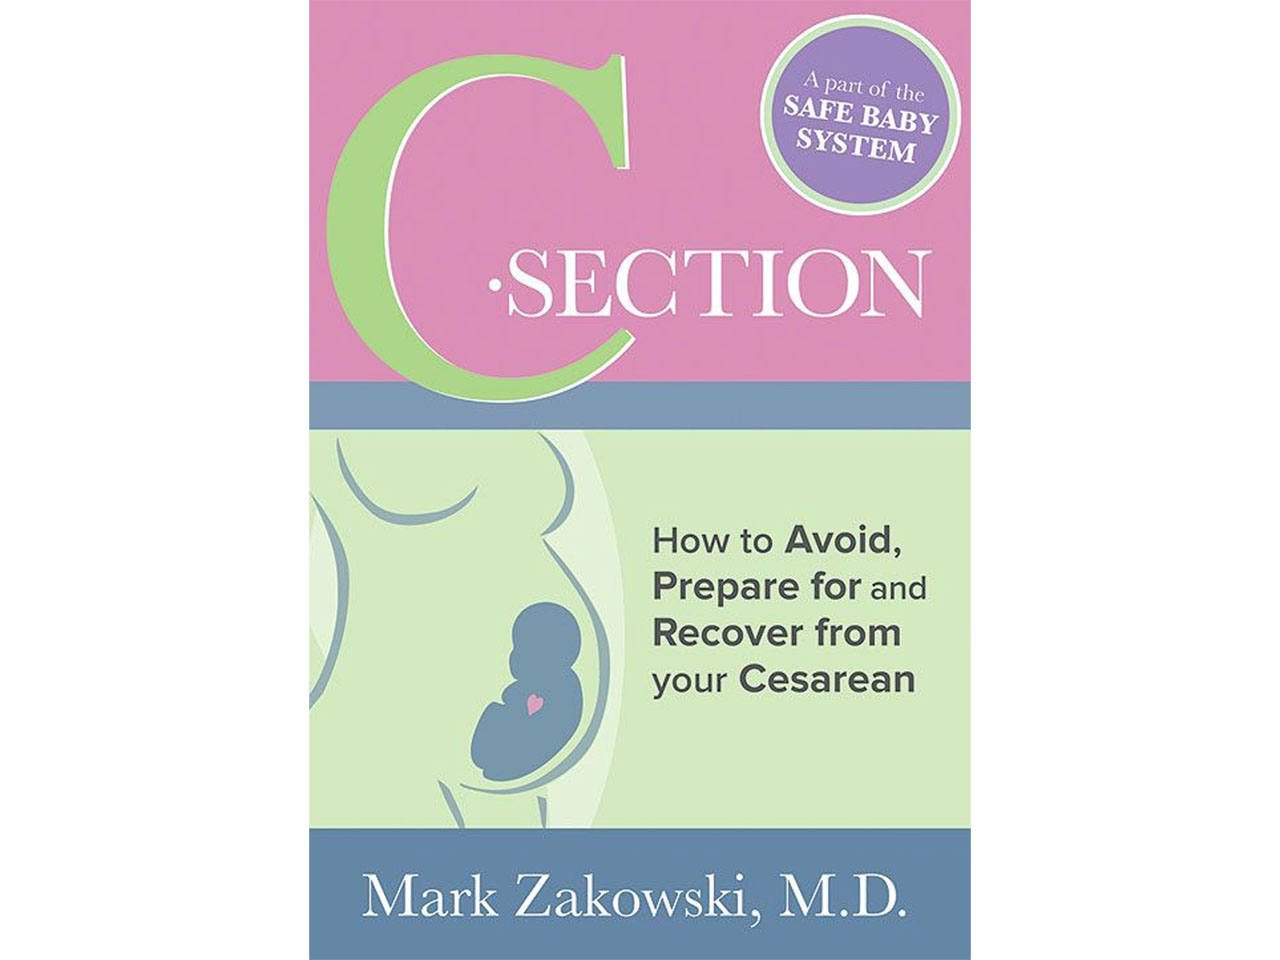 Cover of pregnancy book C-section how to Avoid, Prepare For and Recover from Your Cesarean